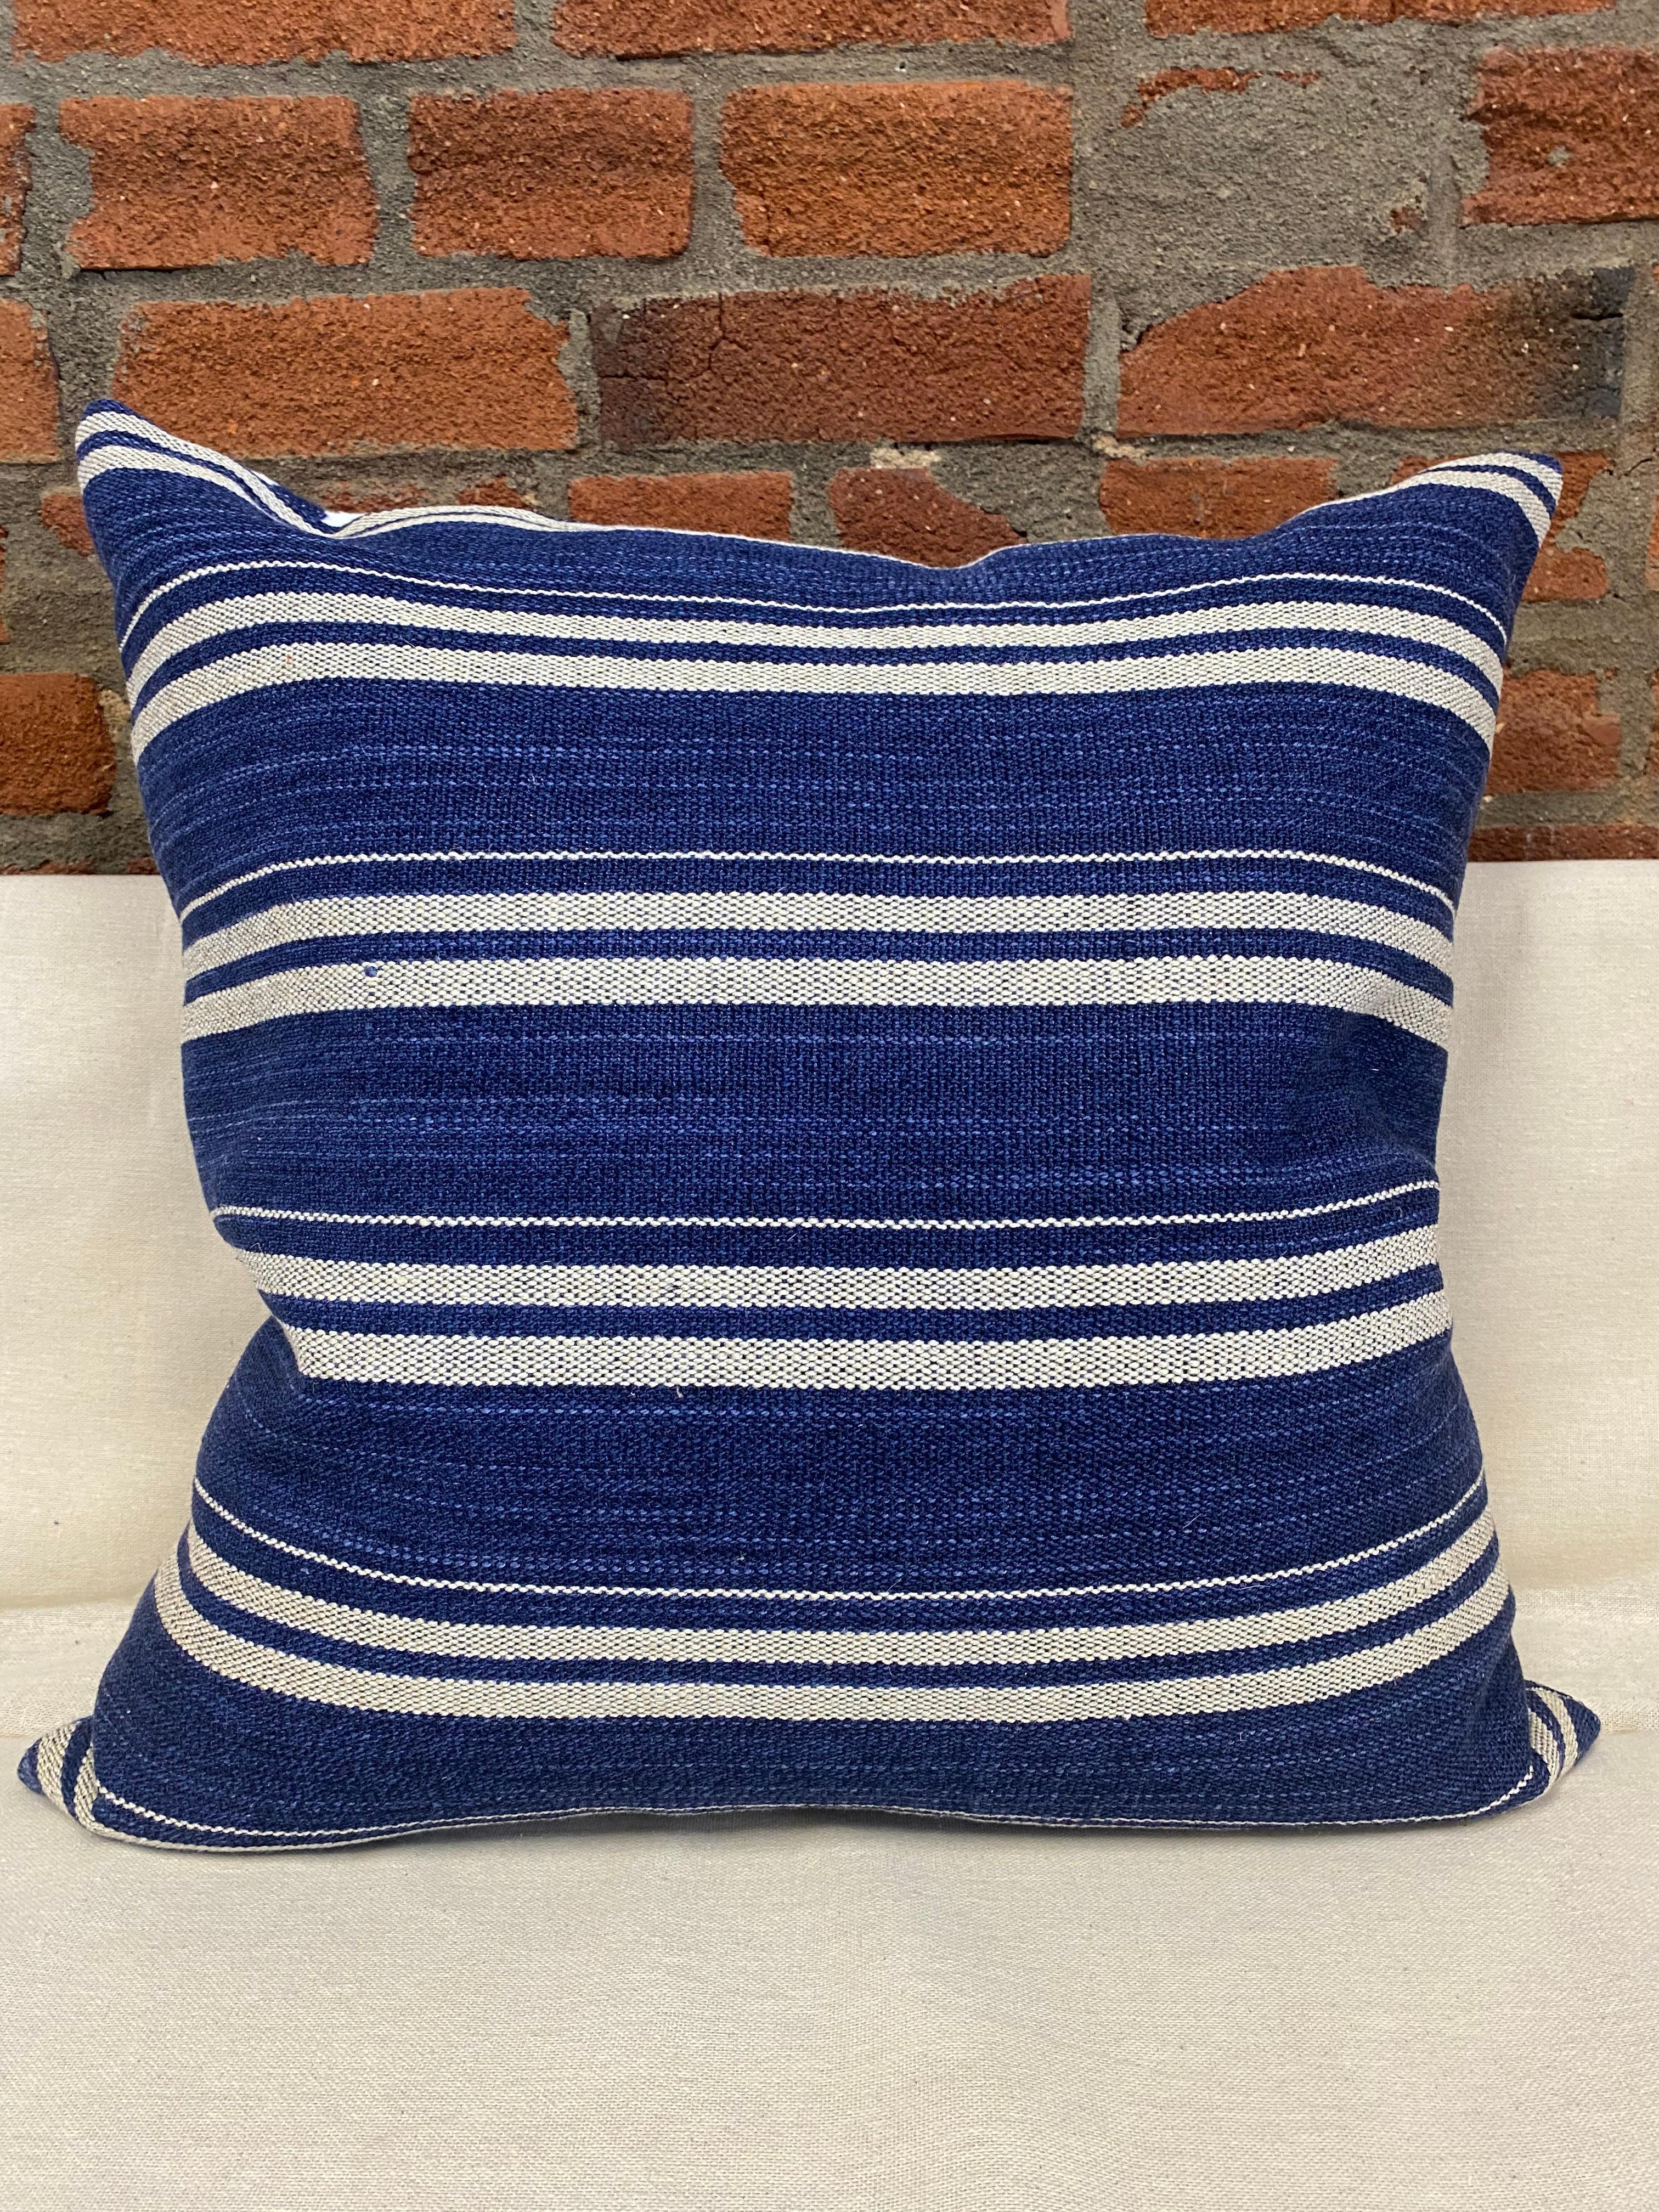 American Indigo Blues Patchwork Pillow with Heavy Cotton Blue Stripe Back For Sale